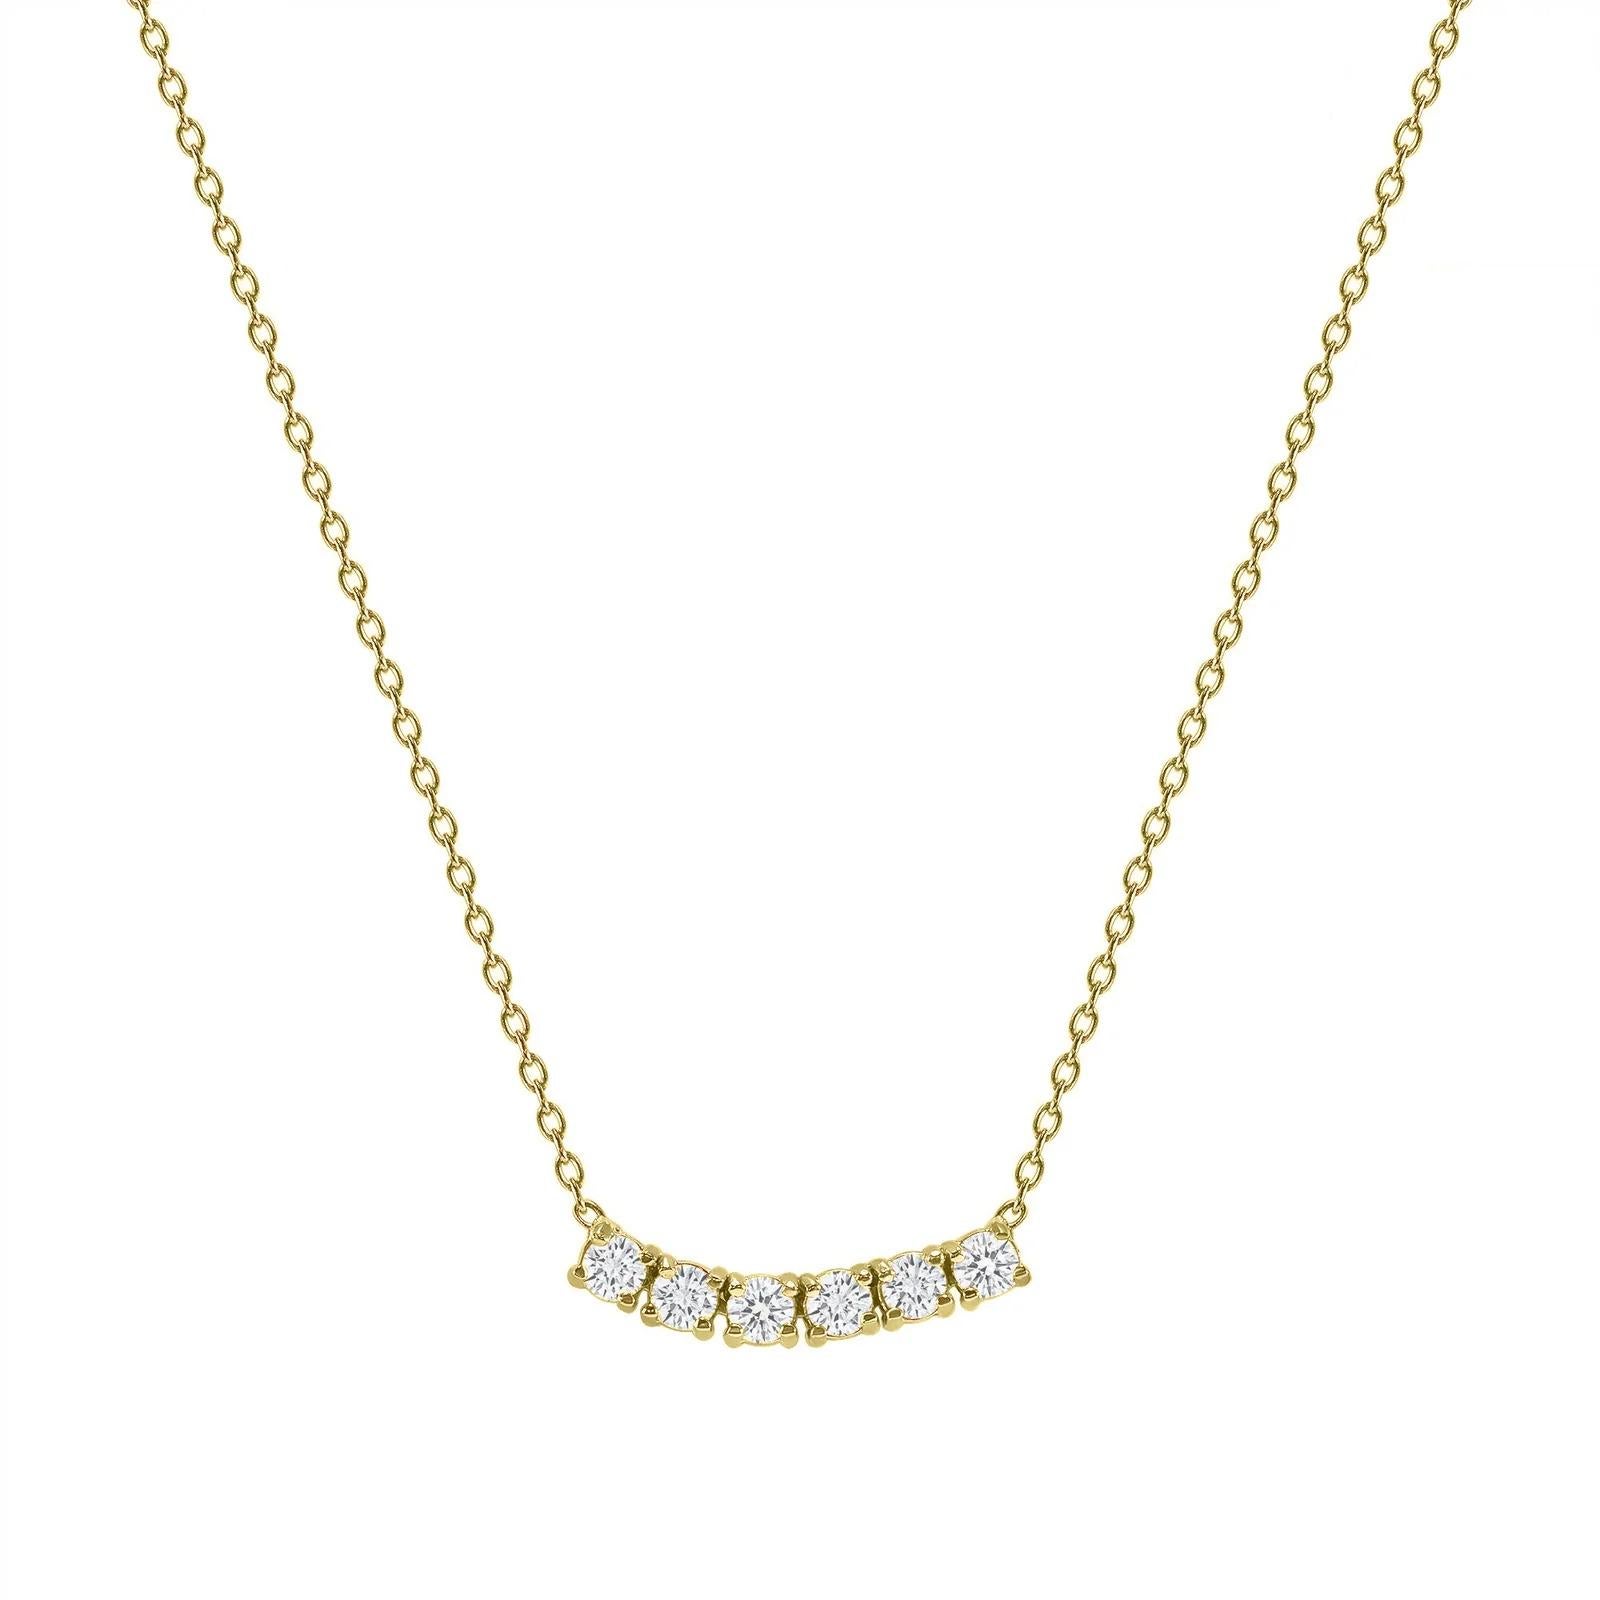 This petite, curved diamond necklace is crafted with gorgeous 14k gold set with six round diamonds.  

Gold: 14k 
Diamond Total Carats: 0.50 ct
Diamond Cut: Round (6 diamonds)
Diamond Clarity: VS
Diamond Color: F
Color: Yellow Gold
Necklace Length: